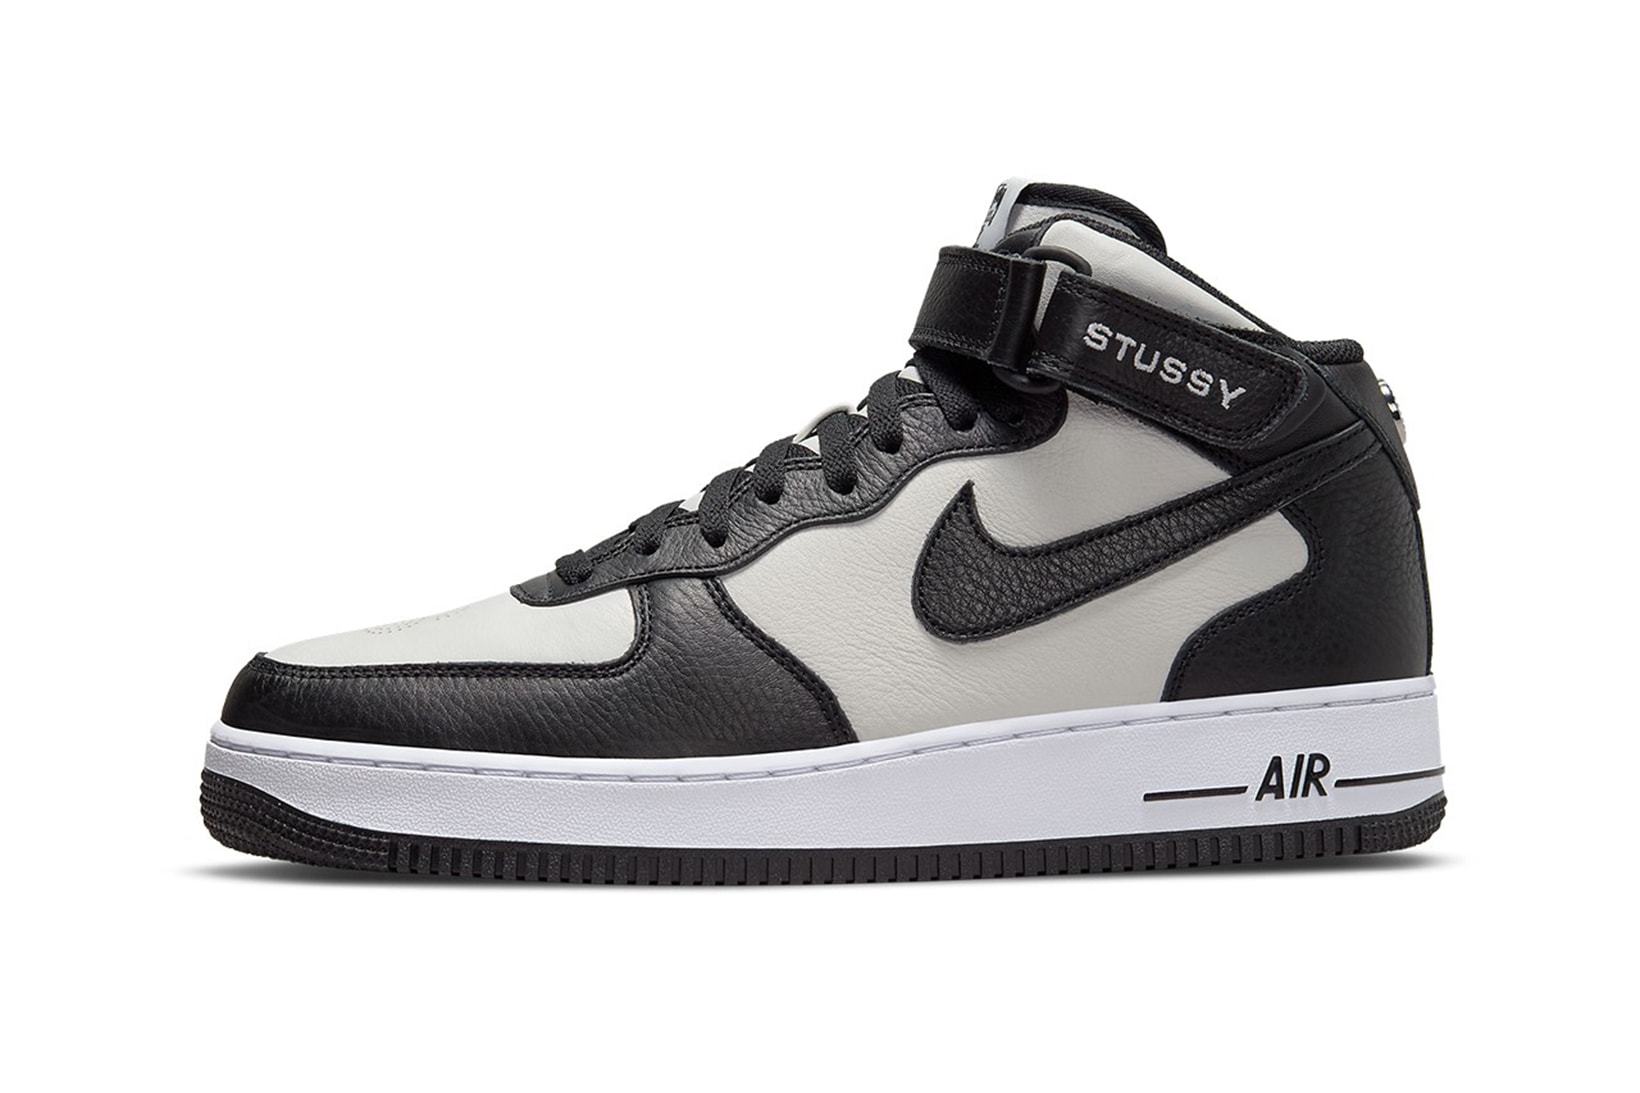 Stüssy Nike Air Force 1 Mid Sneakers Black White Side View